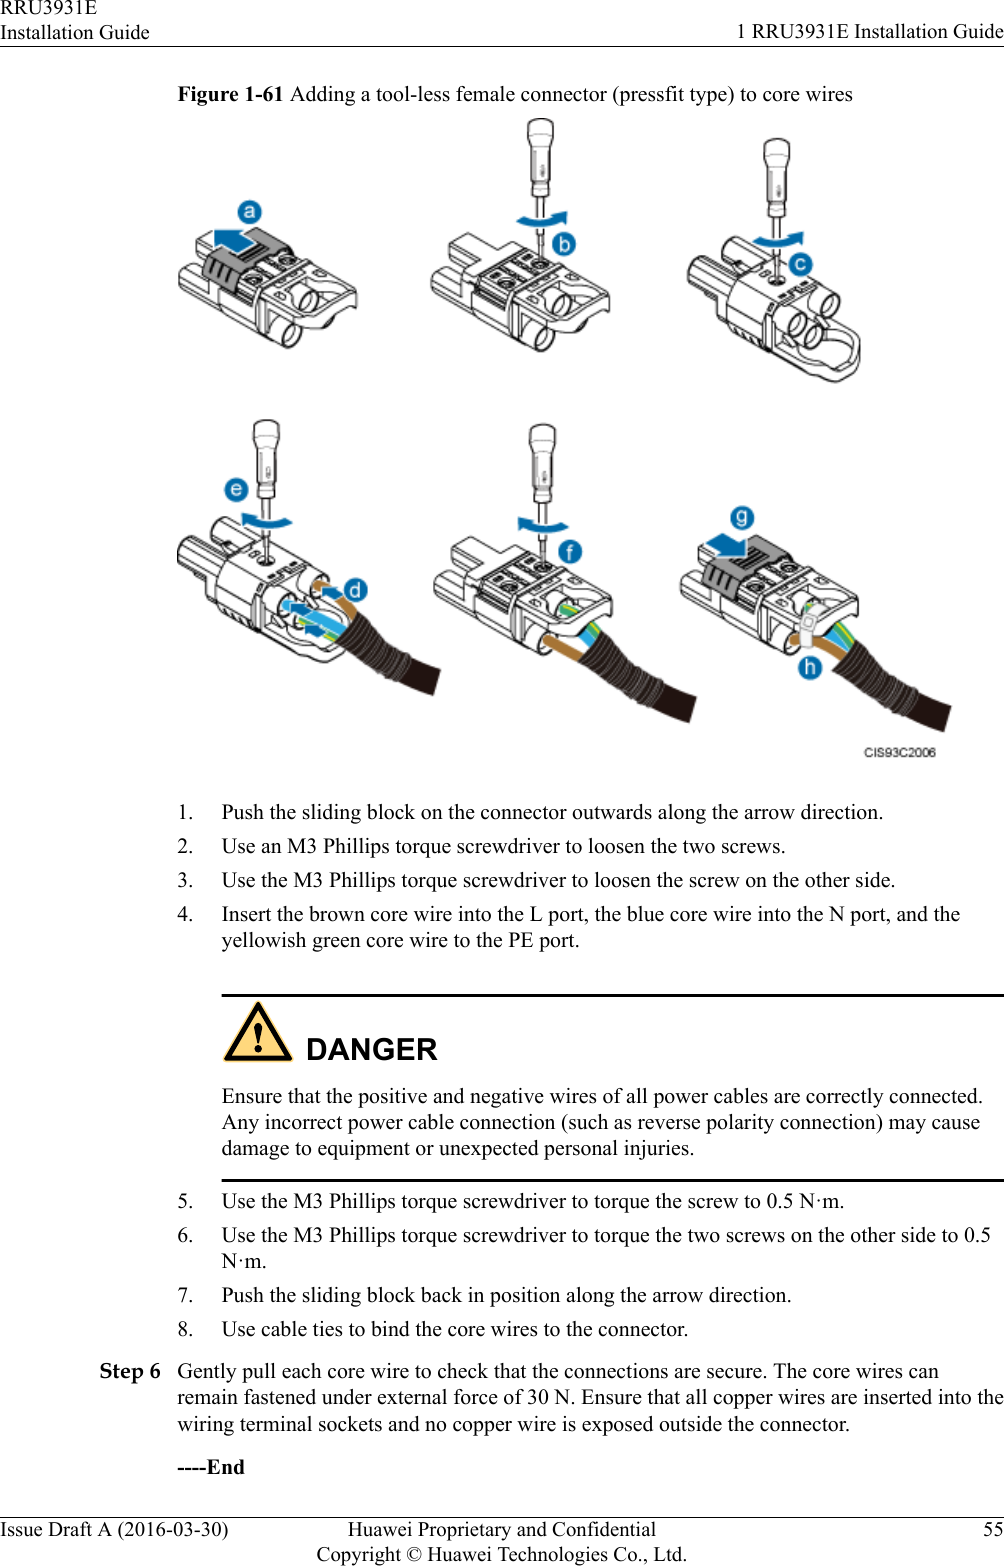 Figure 1-61 Adding a tool-less female connector (pressfit type) to core wires1. Push the sliding block on the connector outwards along the arrow direction.2. Use an M3 Phillips torque screwdriver to loosen the two screws.3. Use the M3 Phillips torque screwdriver to loosen the screw on the other side.4. Insert the brown core wire into the L port, the blue core wire into the N port, and theyellowish green core wire to the PE port.DANGEREnsure that the positive and negative wires of all power cables are correctly connected.Any incorrect power cable connection (such as reverse polarity connection) may causedamage to equipment or unexpected personal injuries.5. Use the M3 Phillips torque screwdriver to torque the screw to 0.5 N·m.6. Use the M3 Phillips torque screwdriver to torque the two screws on the other side to 0.5N·m.7. Push the sliding block back in position along the arrow direction.8. Use cable ties to bind the core wires to the connector.Step 6 Gently pull each core wire to check that the connections are secure. The core wires canremain fastened under external force of 30 N. Ensure that all copper wires are inserted into thewiring terminal sockets and no copper wire is exposed outside the connector.----EndRRU3931EInstallation Guide 1 RRU3931E Installation GuideIssue Draft A (2016-03-30) Huawei Proprietary and ConfidentialCopyright © Huawei Technologies Co., Ltd.55